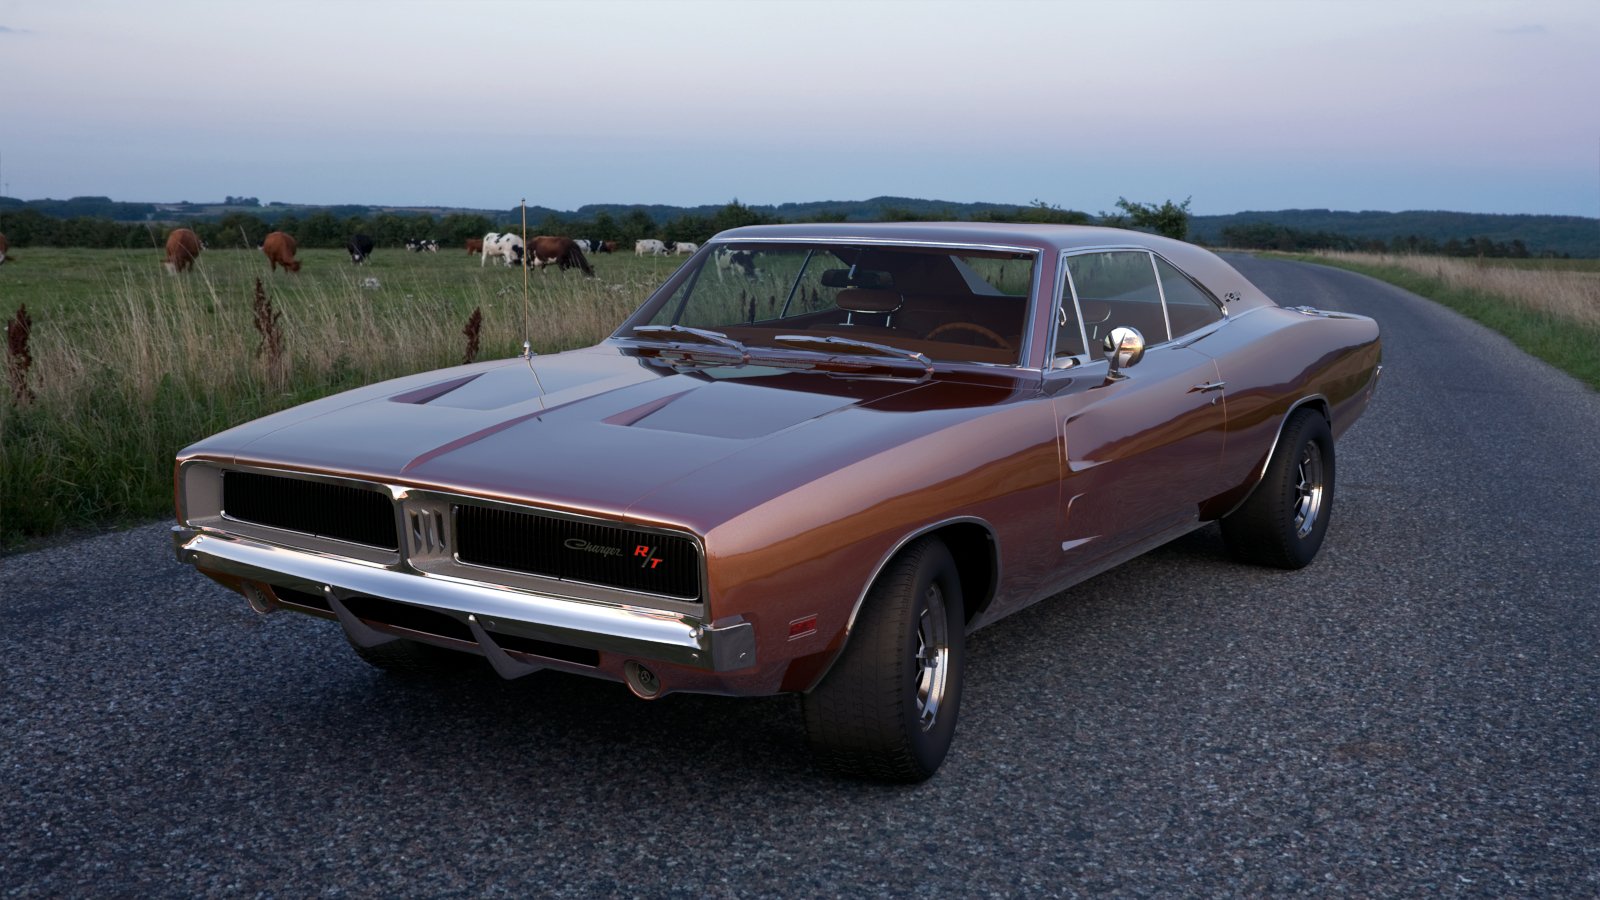 1969 Dodge Charger Rt Wallpaper   image 119